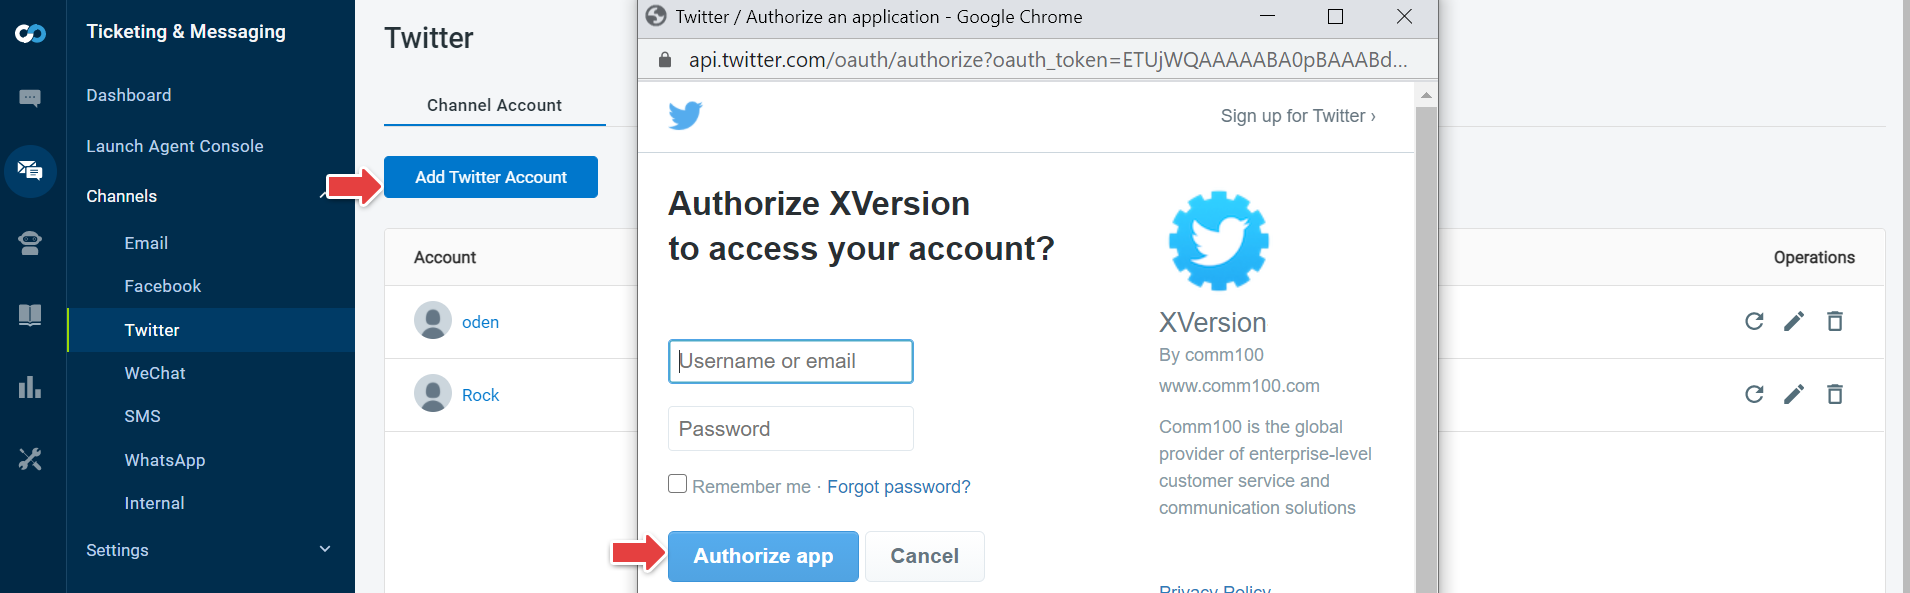 Twitter _ Authorize an application - Google Chrome.png